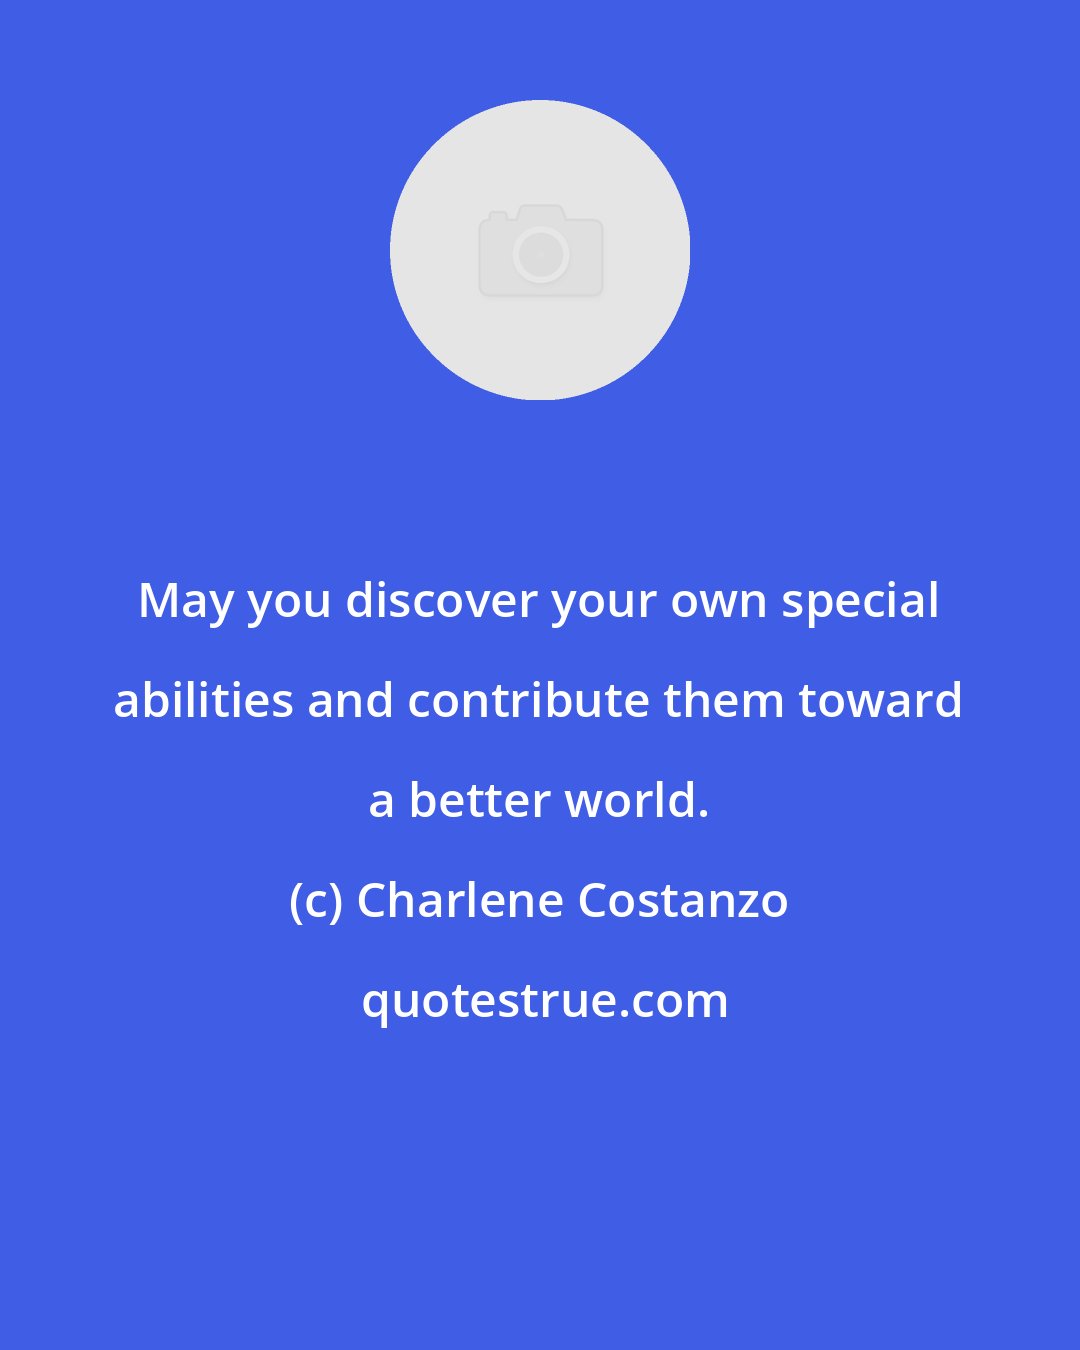 Charlene Costanzo: May you discover your own special abilities and contribute them toward a better world.